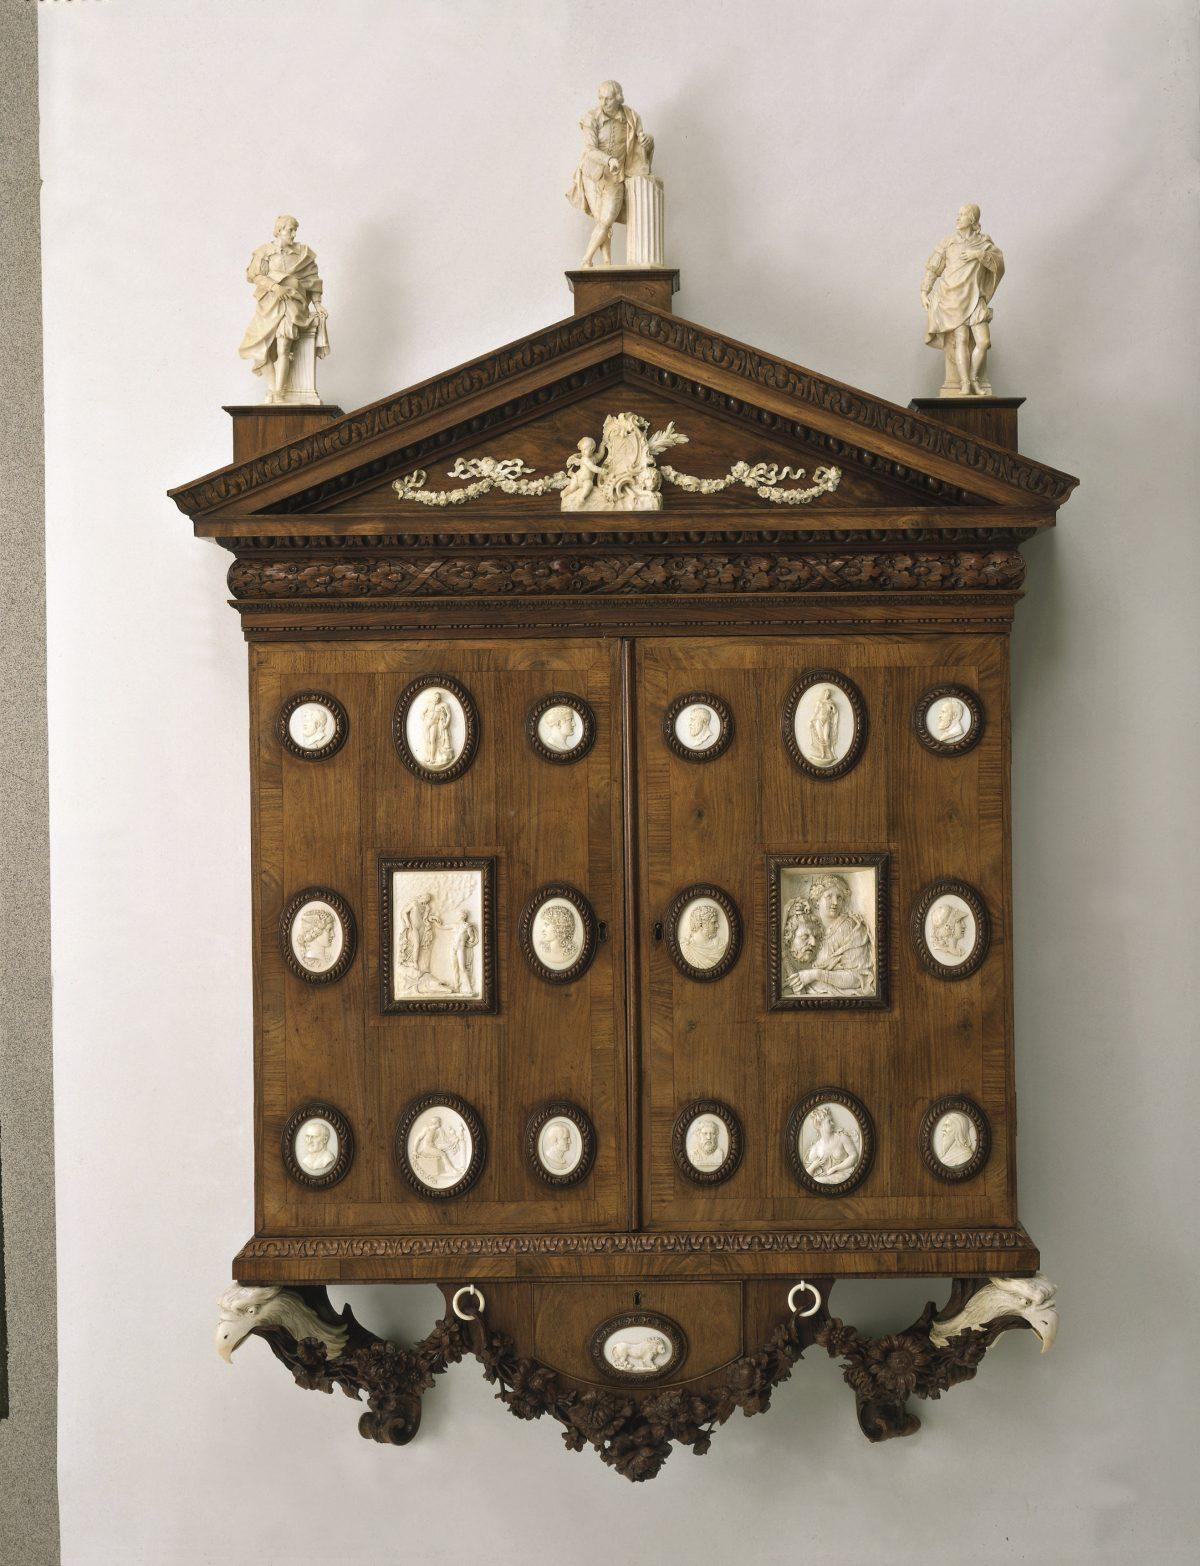 Cabinet of miniatures and enamels, designed by Horace Walpole, perhaps with William Kent. Perhaps made by William Hallett. Carving, 1743, by James Verskovis and Giovanni Battista Pozzo and anonymous hands. Padouk veneer, set with carved ivories, 60 inches high by 36 inches wide by 8 1/2 inches deep. (V&A images/Victoria and Albert Museum, London)